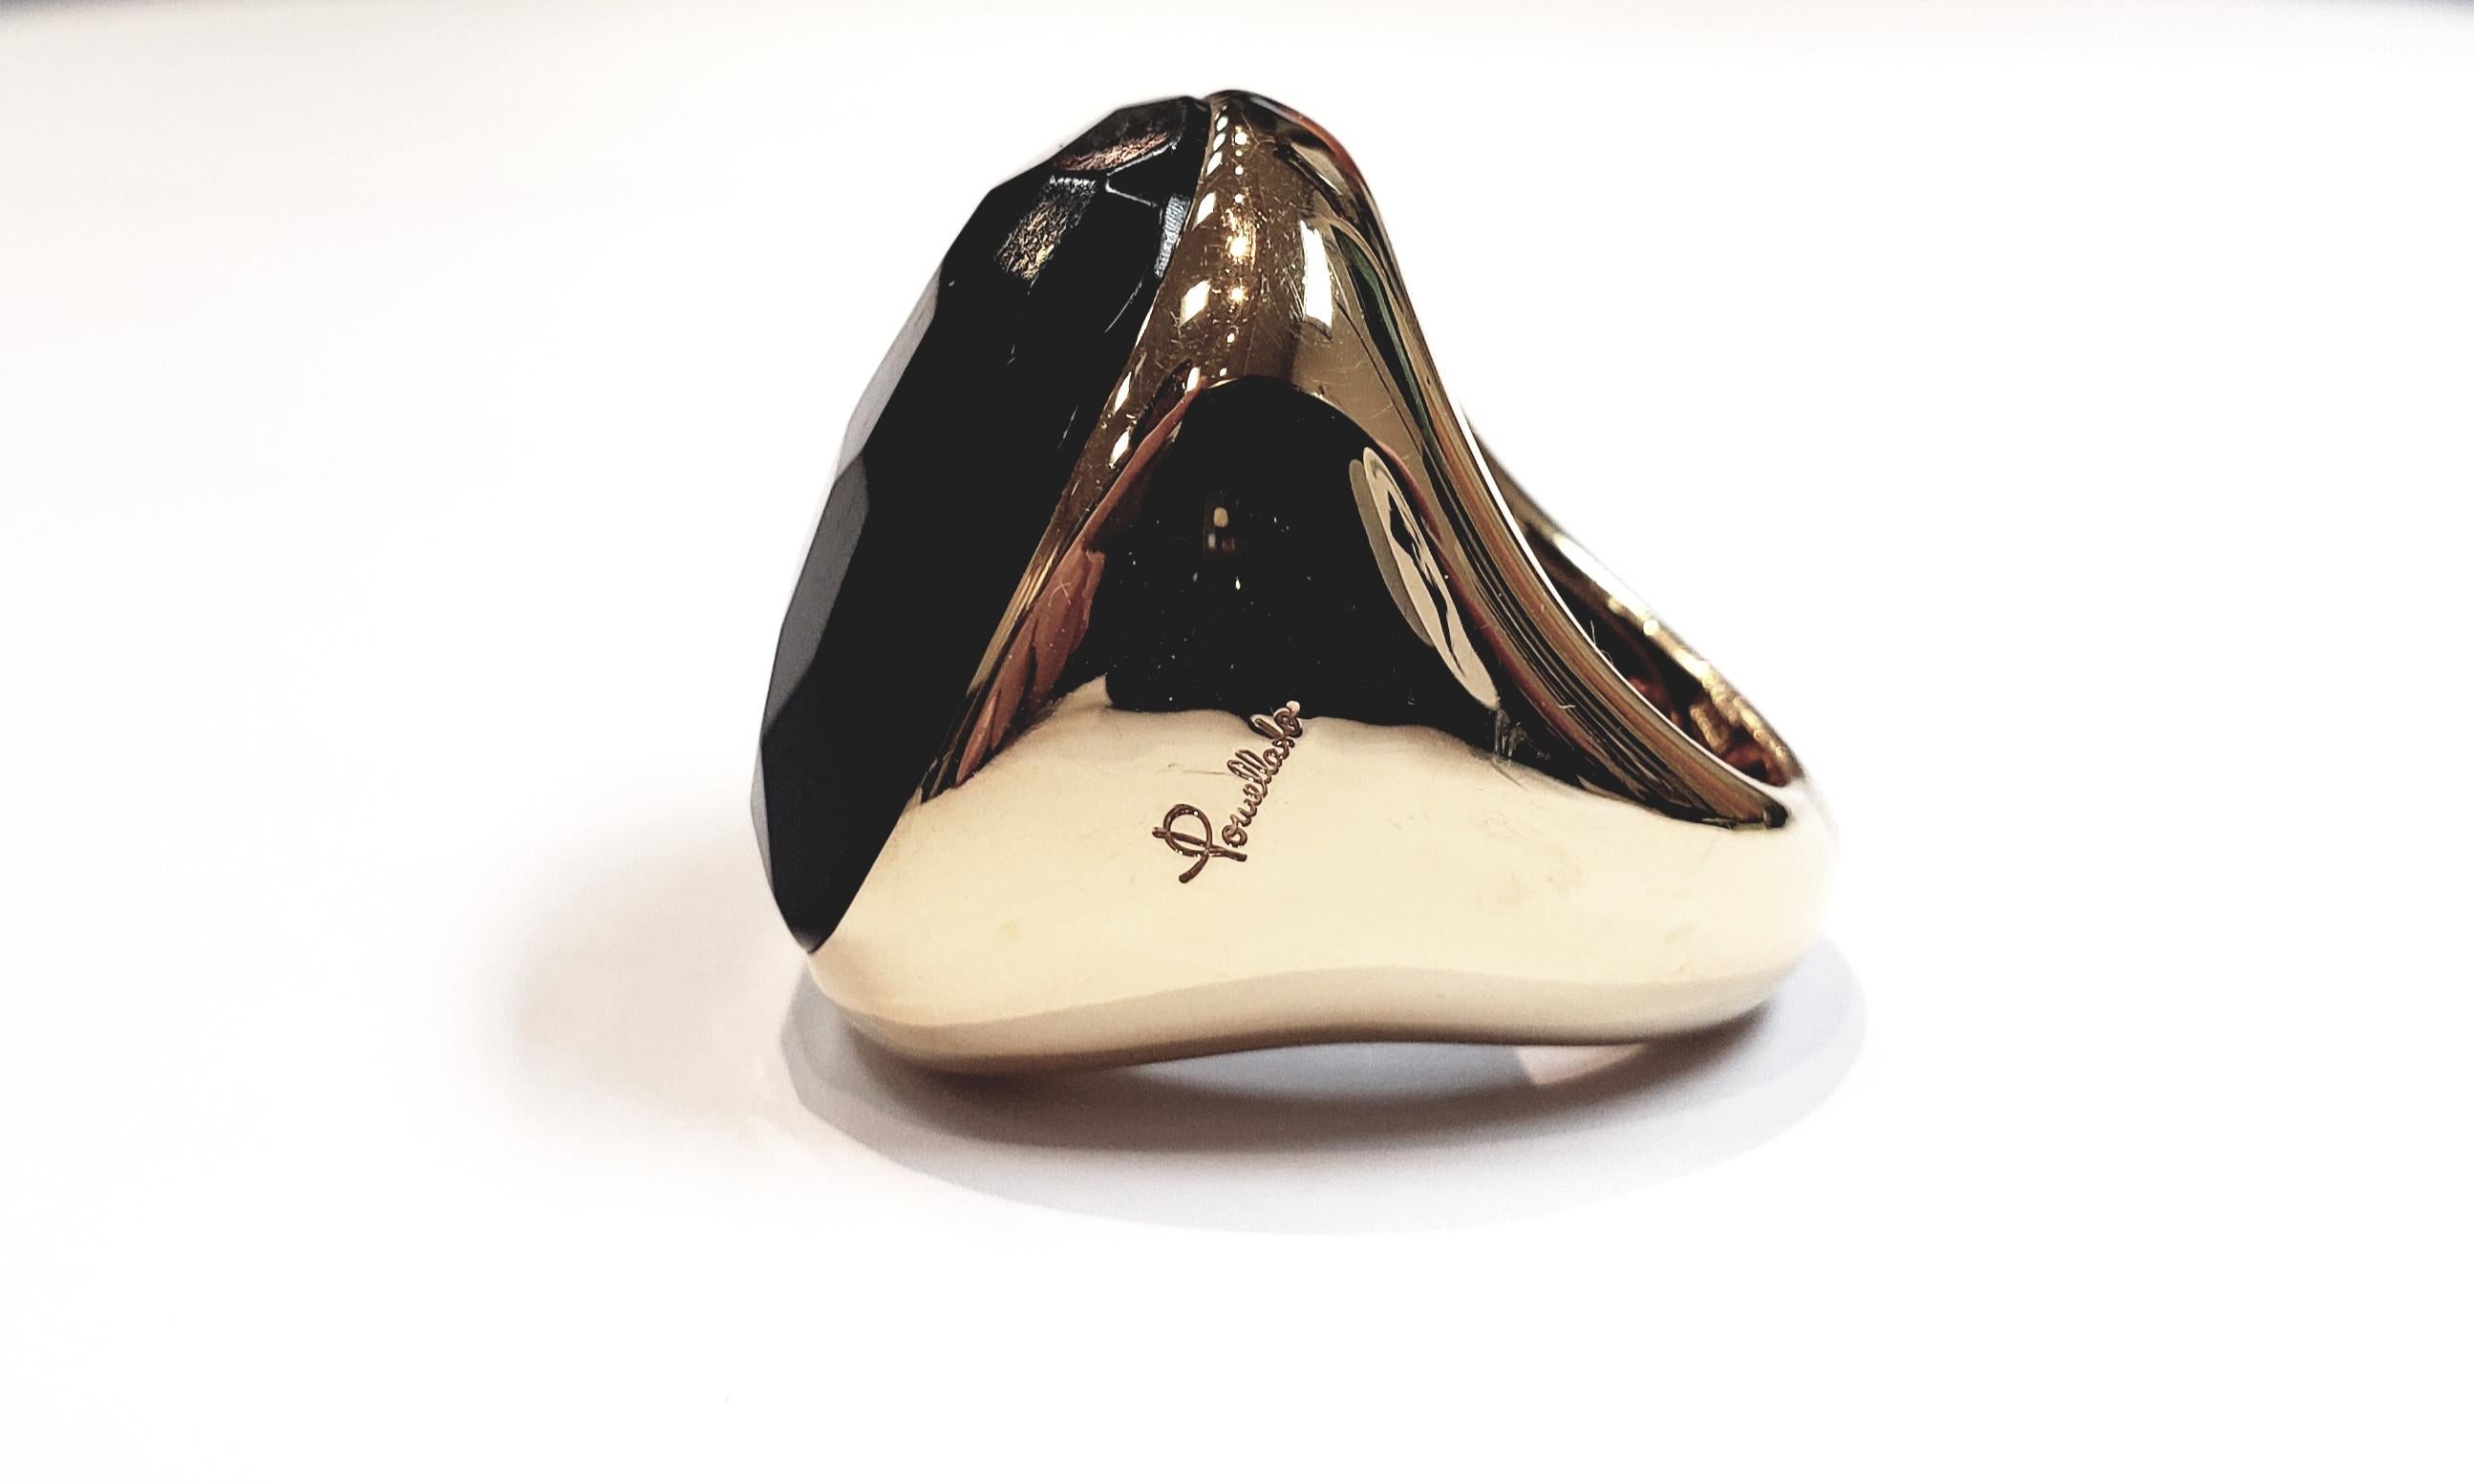 This Ring Makes A Statement! An 18 Karat Pink Gold Large  Cushion Shape Ring, With A Faceted Black Jet Stone. Stone Has A Soft Matt Finish. Ring Is A European Size 53. (Approx. Size 7)  Pomellato Style Number A.A108/OU/07 This Is Brand New From Our